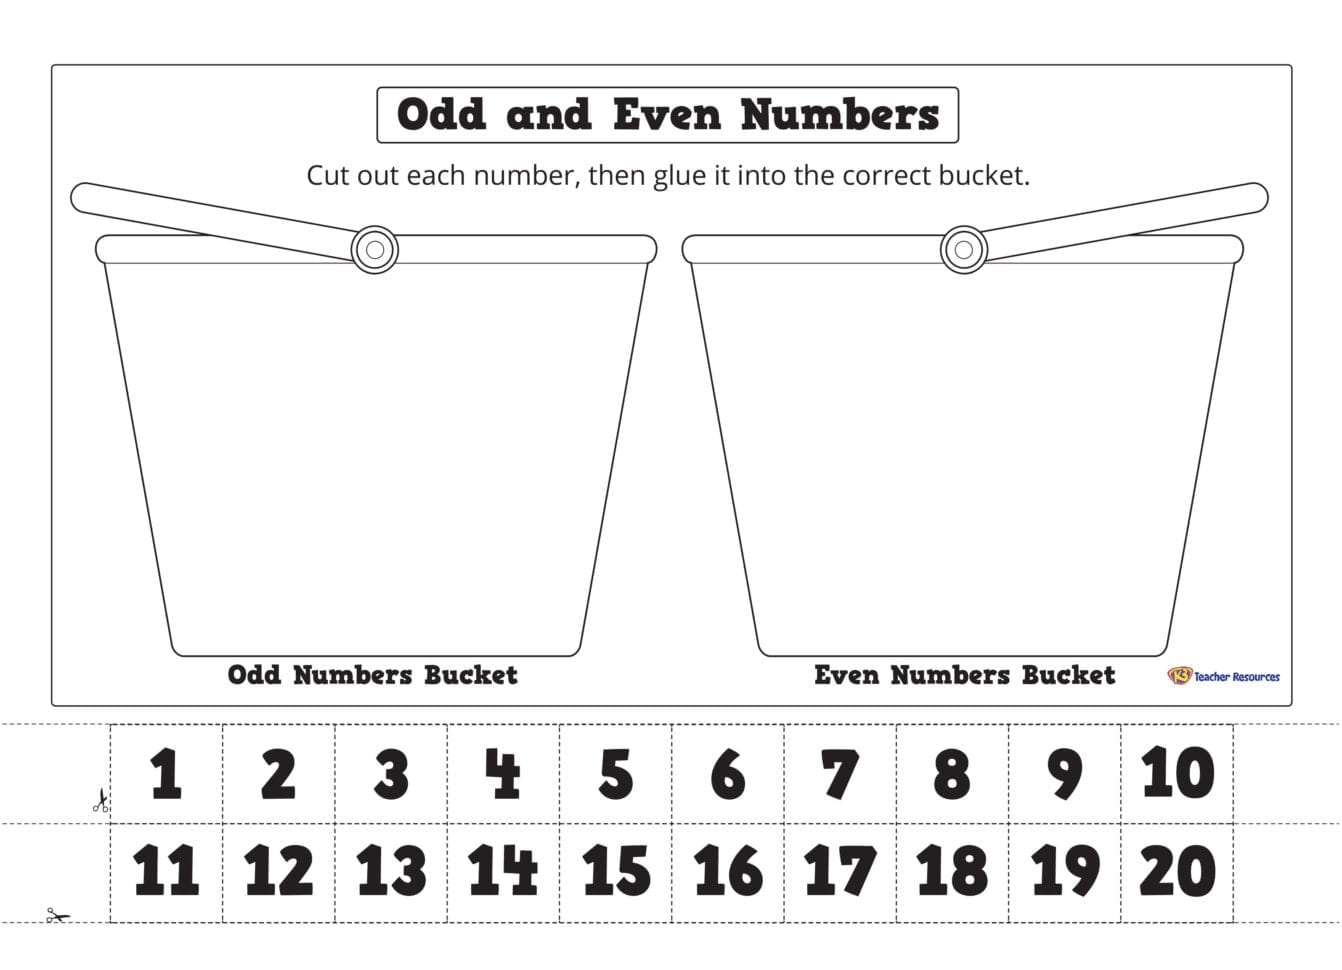 odd-and-even-numbers-cut-and-paste-bucket-worksheet-k3-db-excel